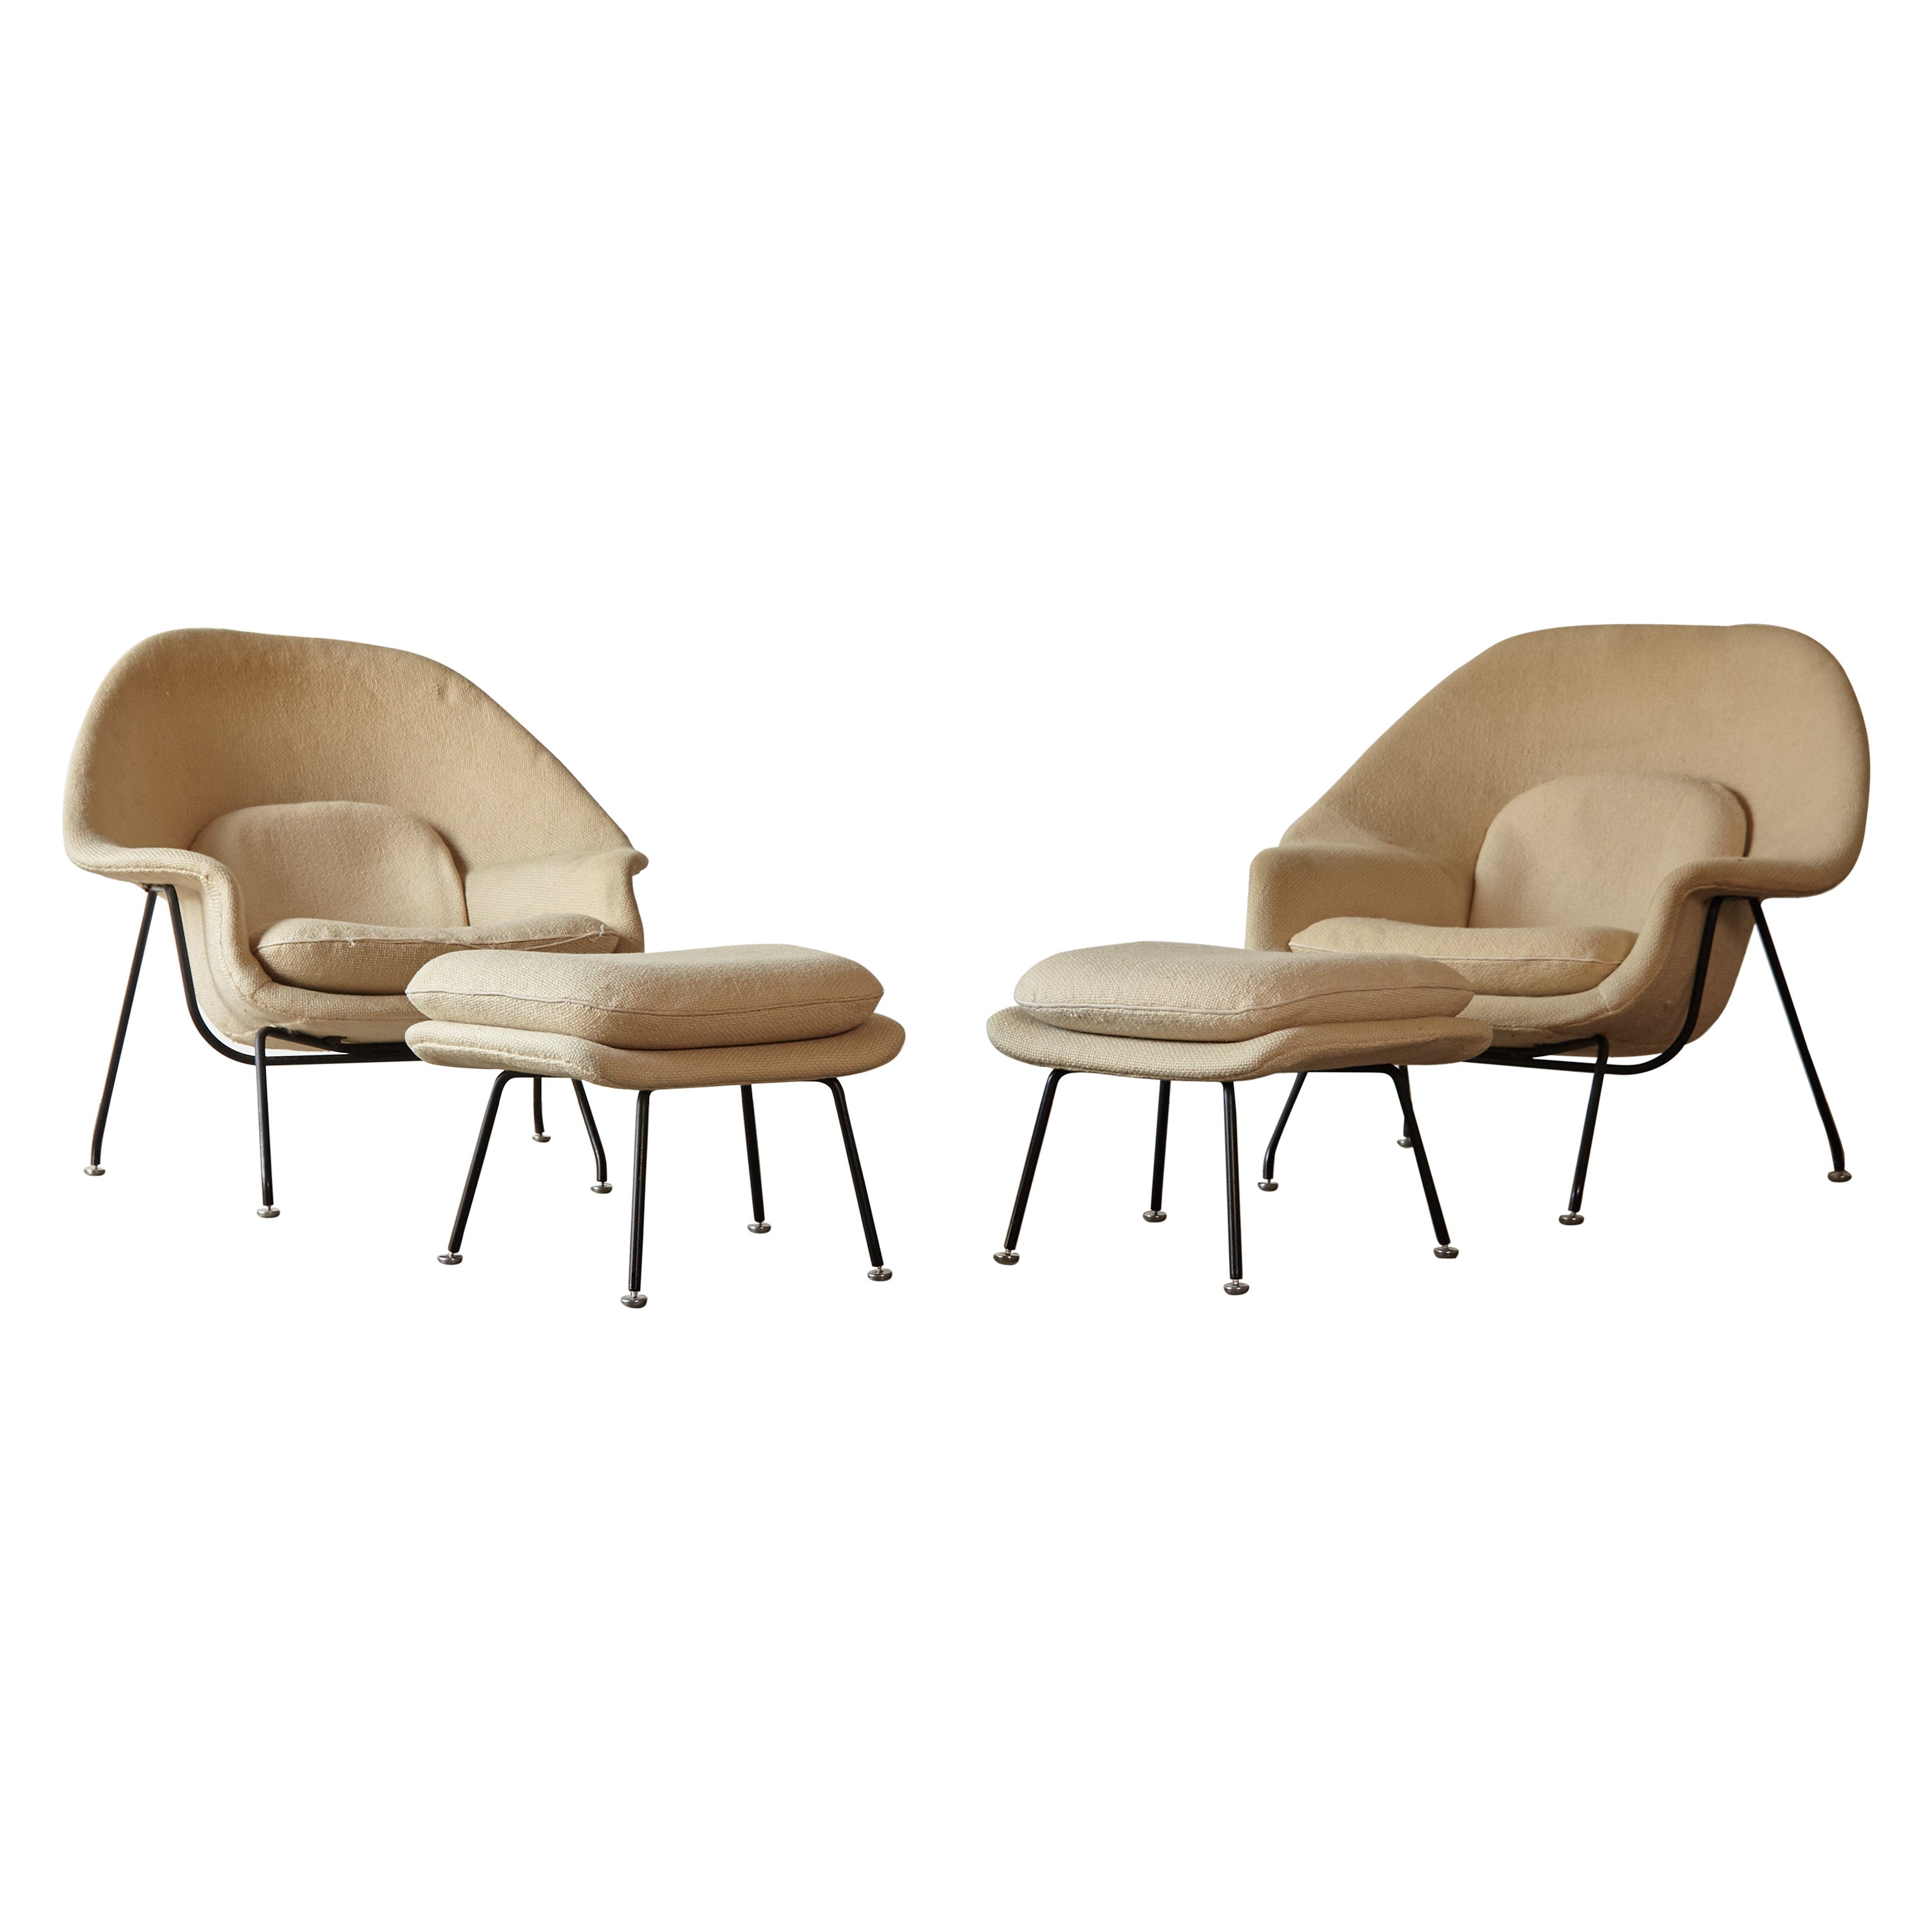 Rare Early Pair of Eero Saarinen Womb Chairs and Ottomans, Knoll, USA, 1950s For Sale